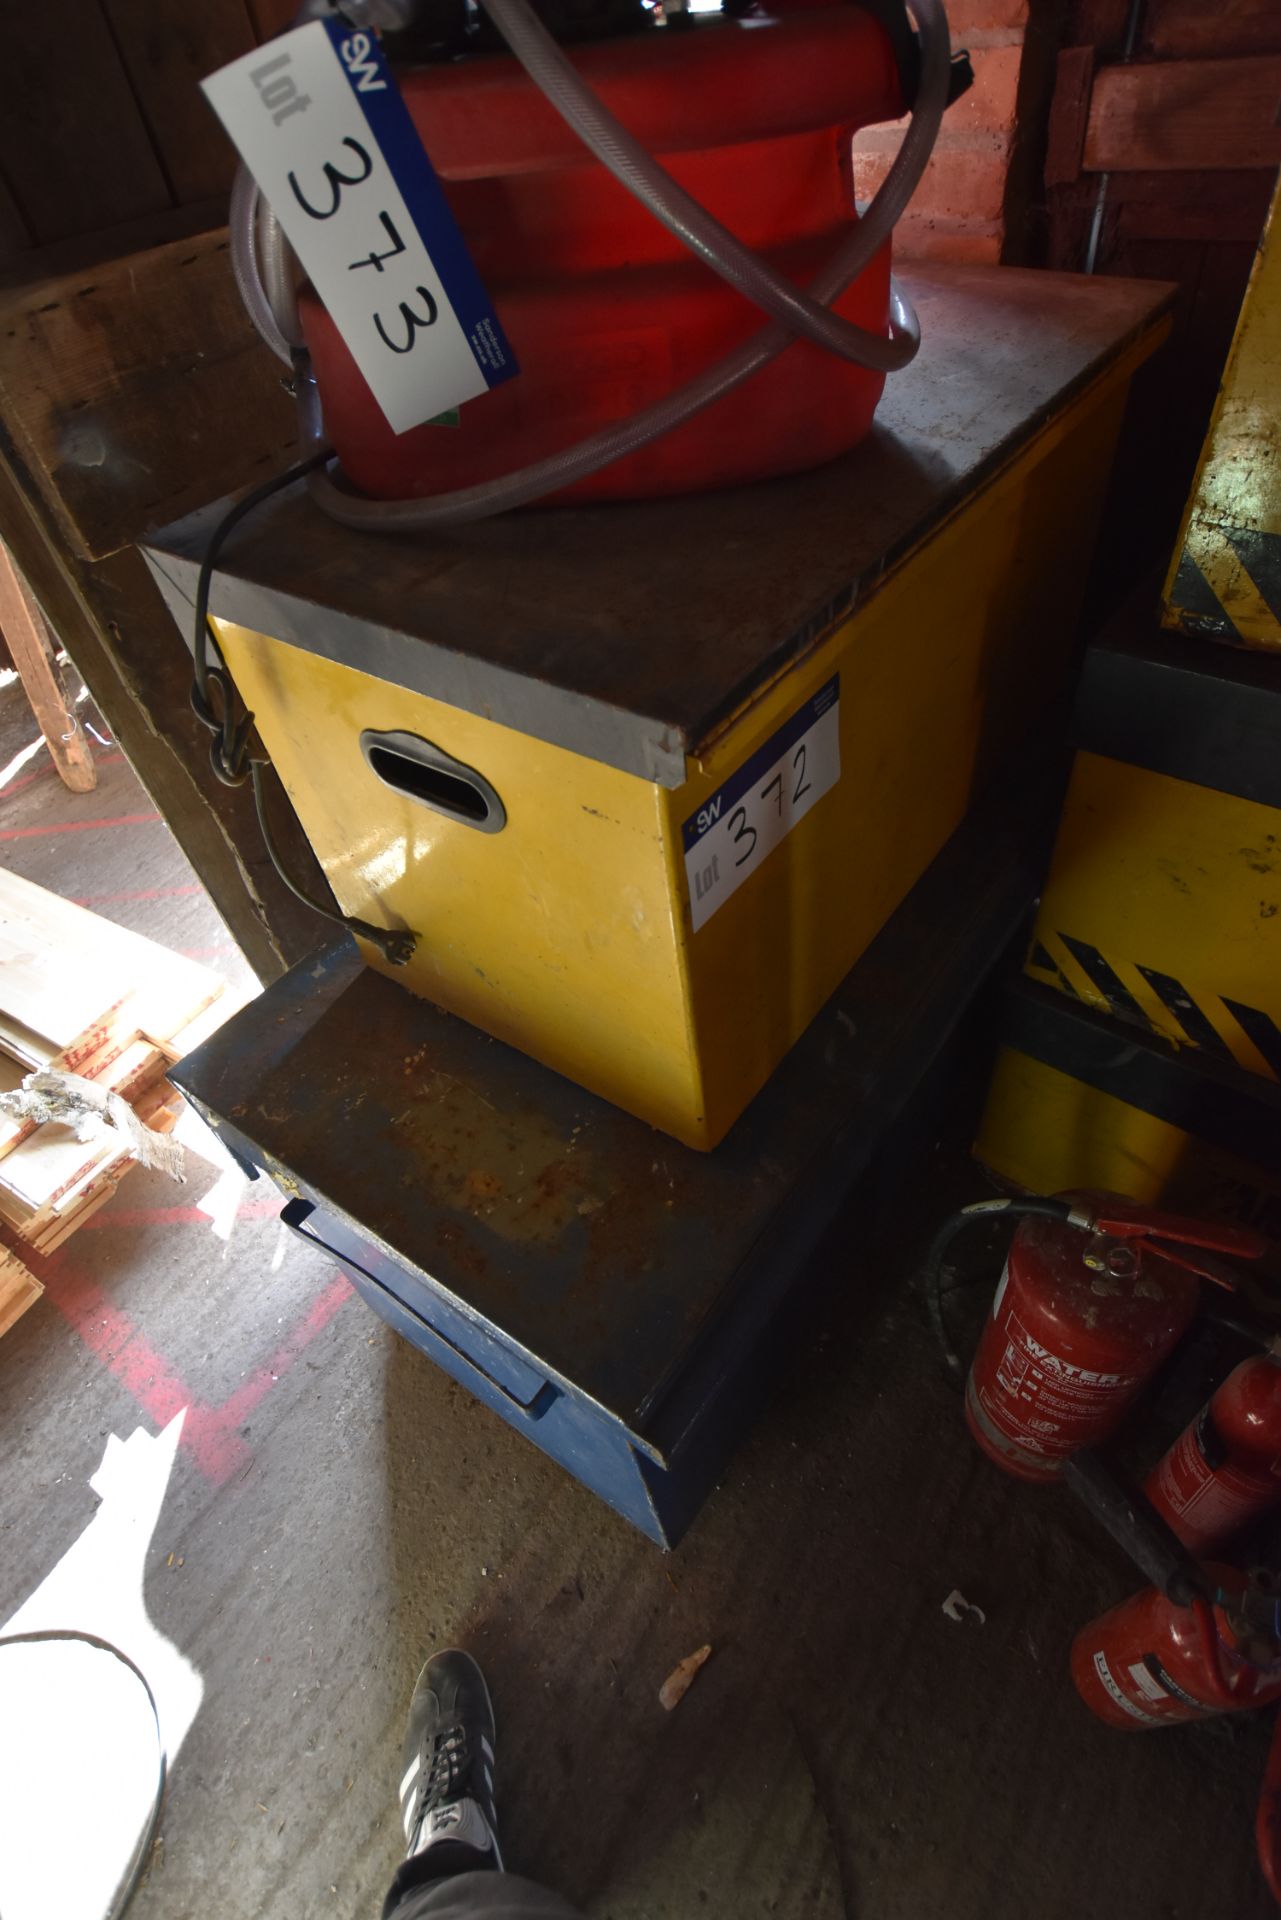 Two Tool Chests (some may be locked), no keys